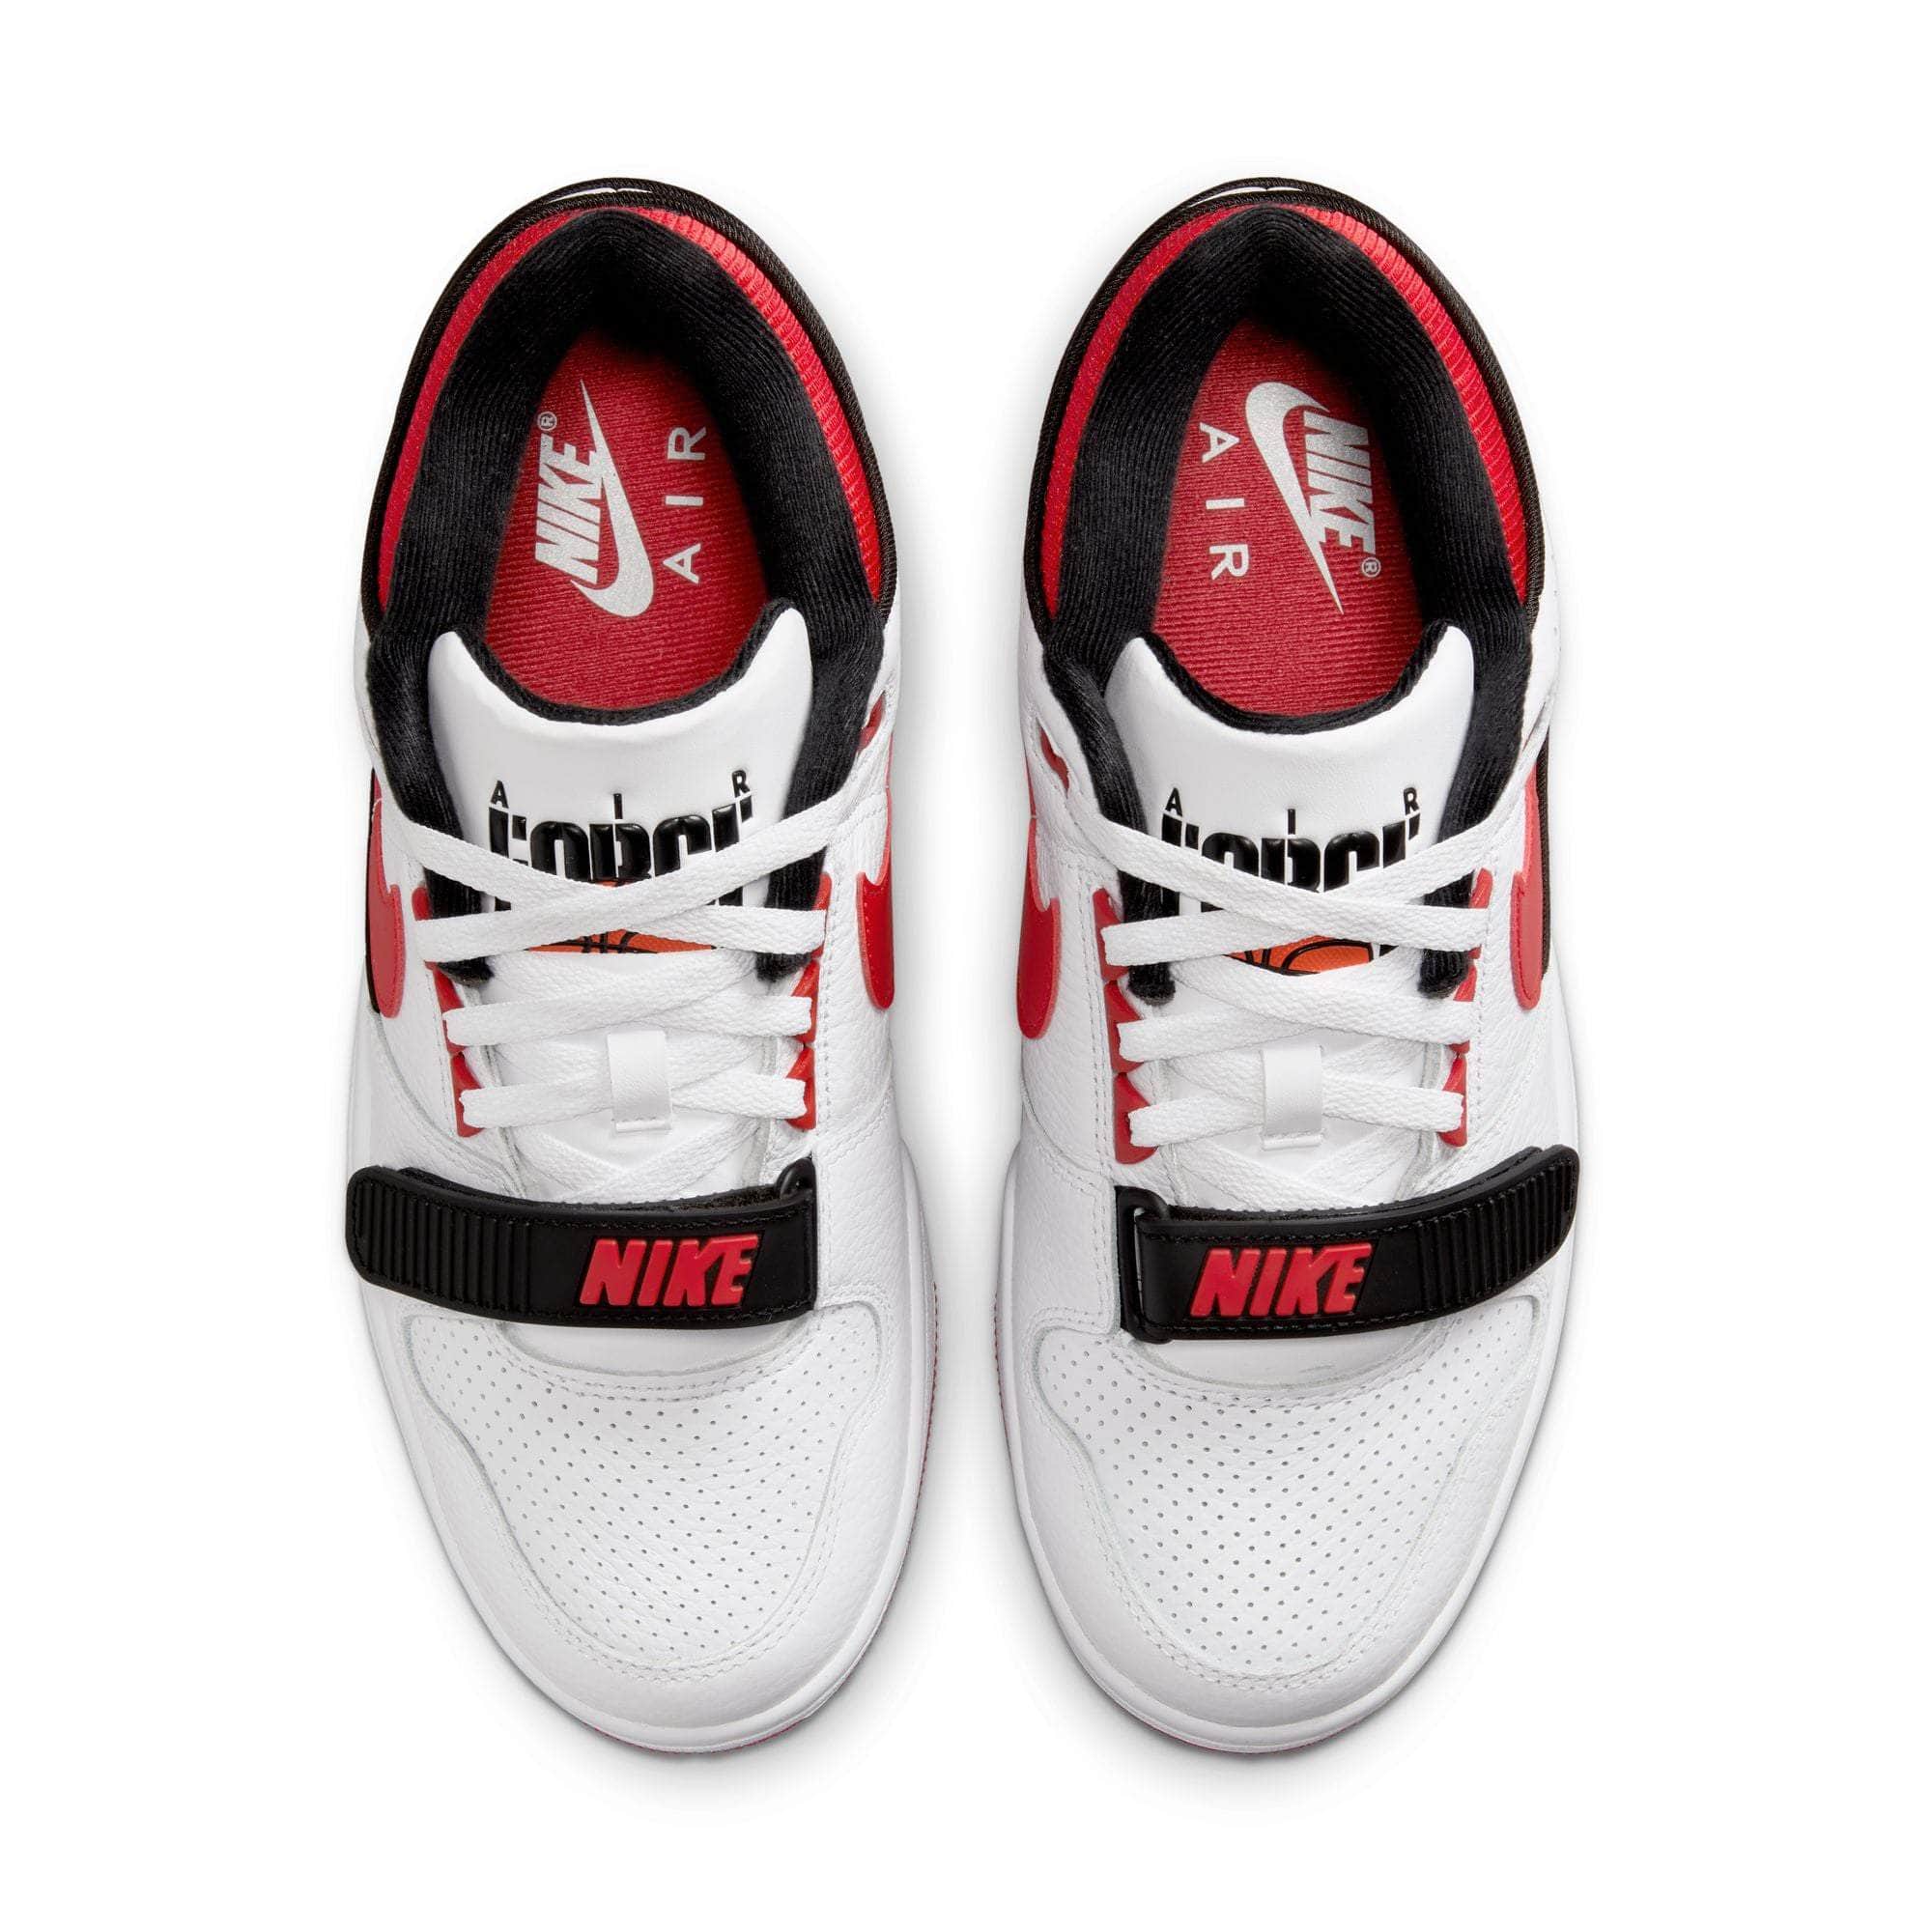 Nike Air Alpha Force "University Red" - Men's - GBNY